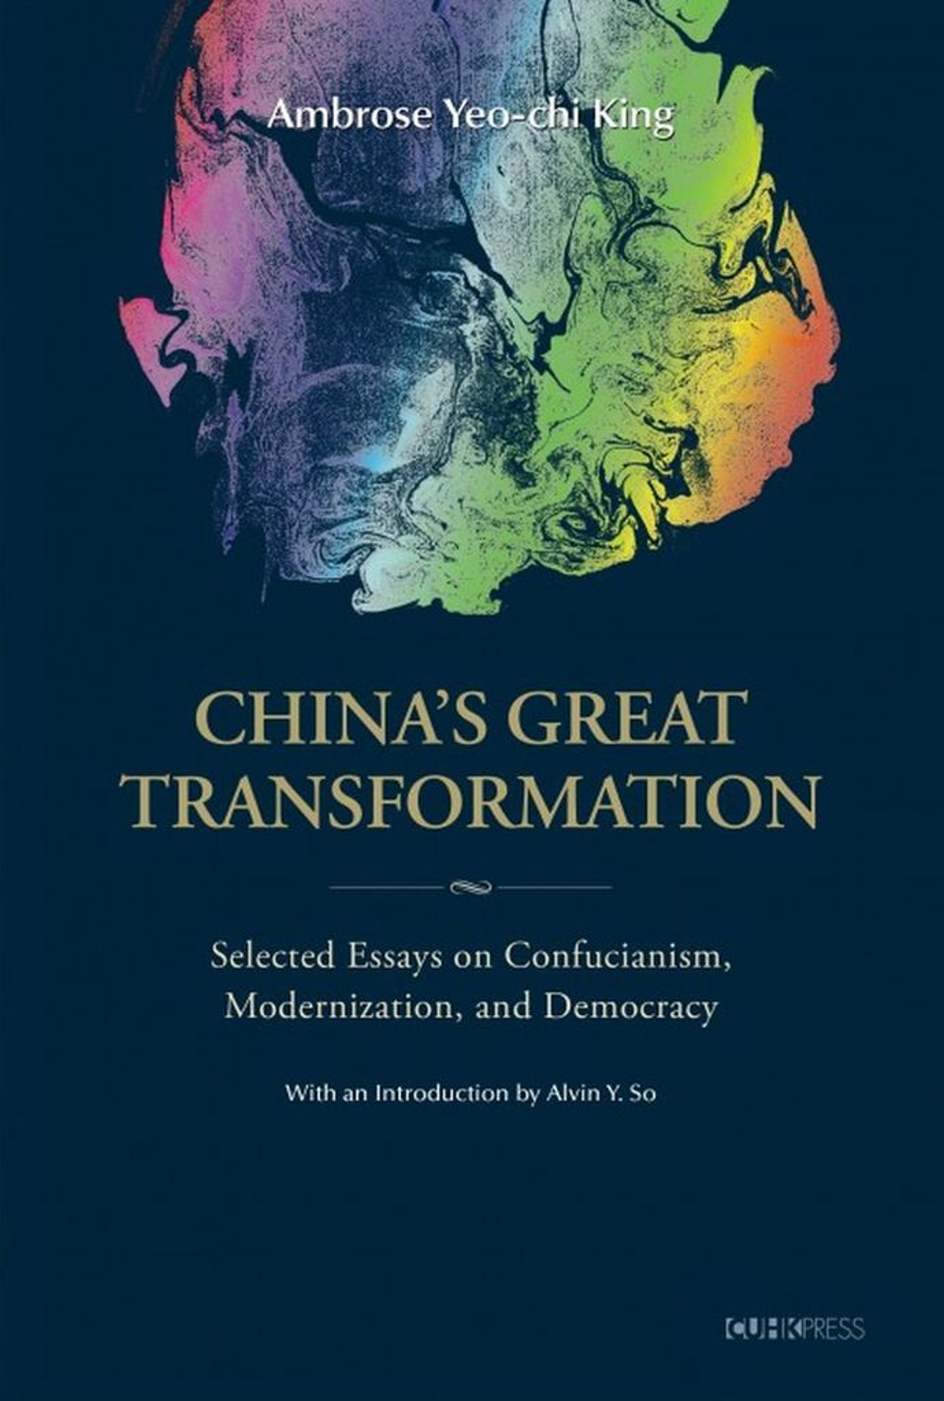 China’s Great Transformation：Selected Essays on Confucianism, Modernization, and Democracy